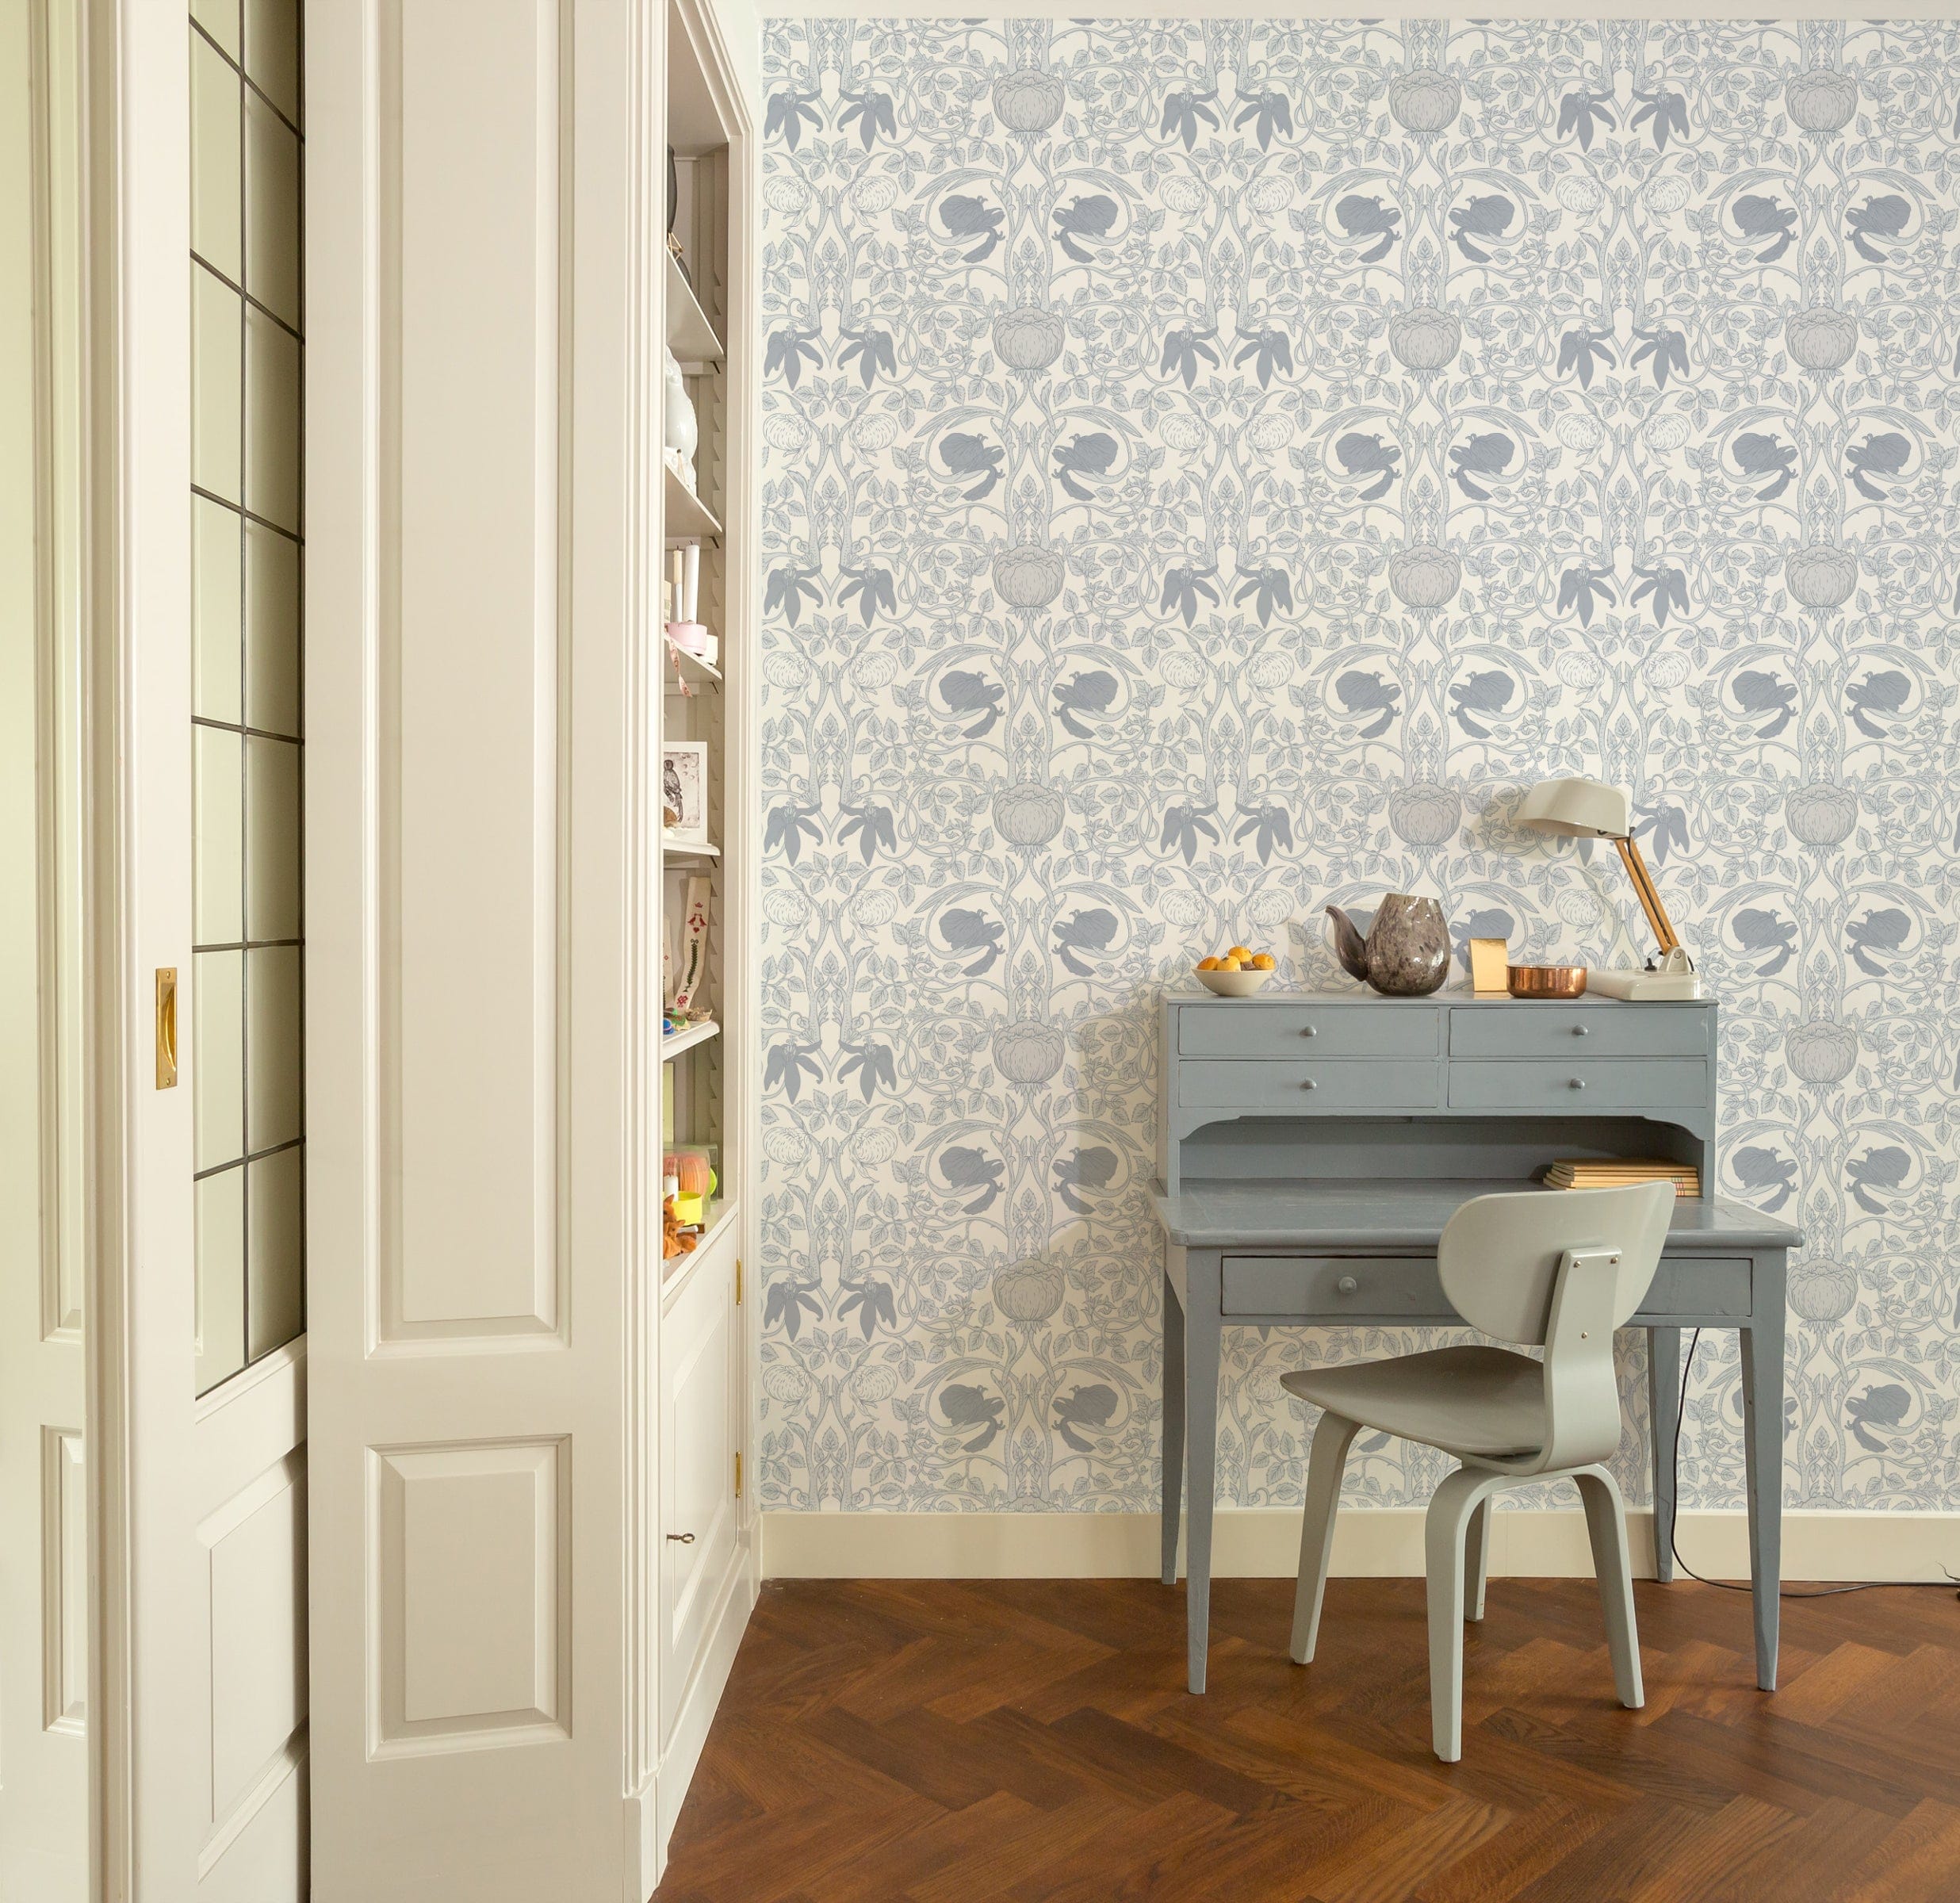 Vintage Floral Damask Wallpaper showcasing an elegant blue floral design in a room with a blue writing desk and chair, wooden flooring, and built-in white shelving.